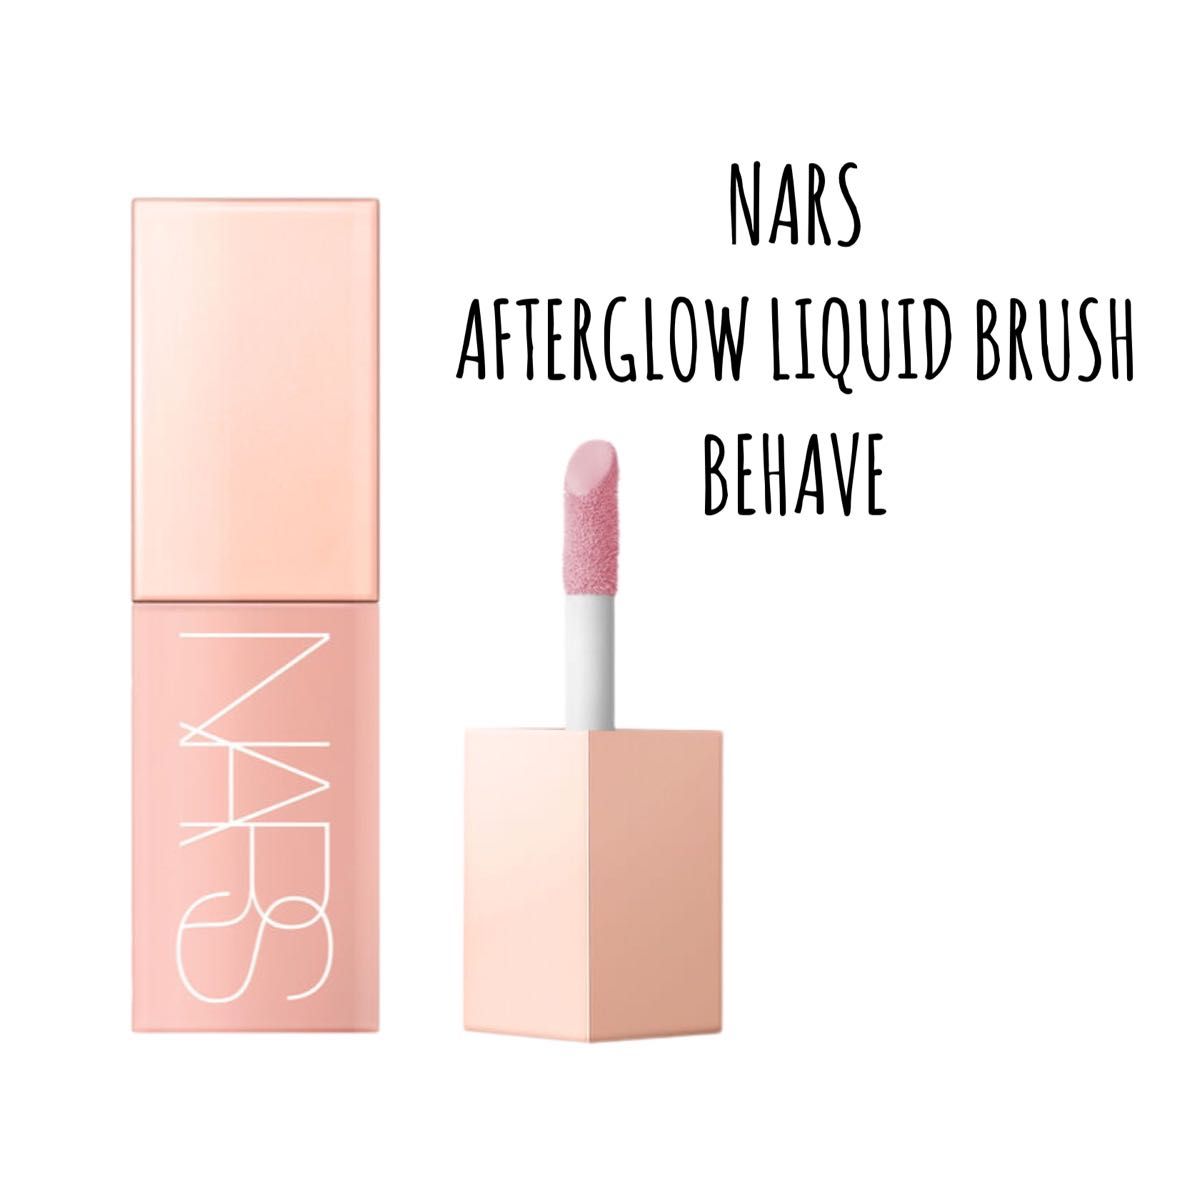 【 NARS 】BEHAVE アフターグロウリキッドブラッシュ ナーズ チーク